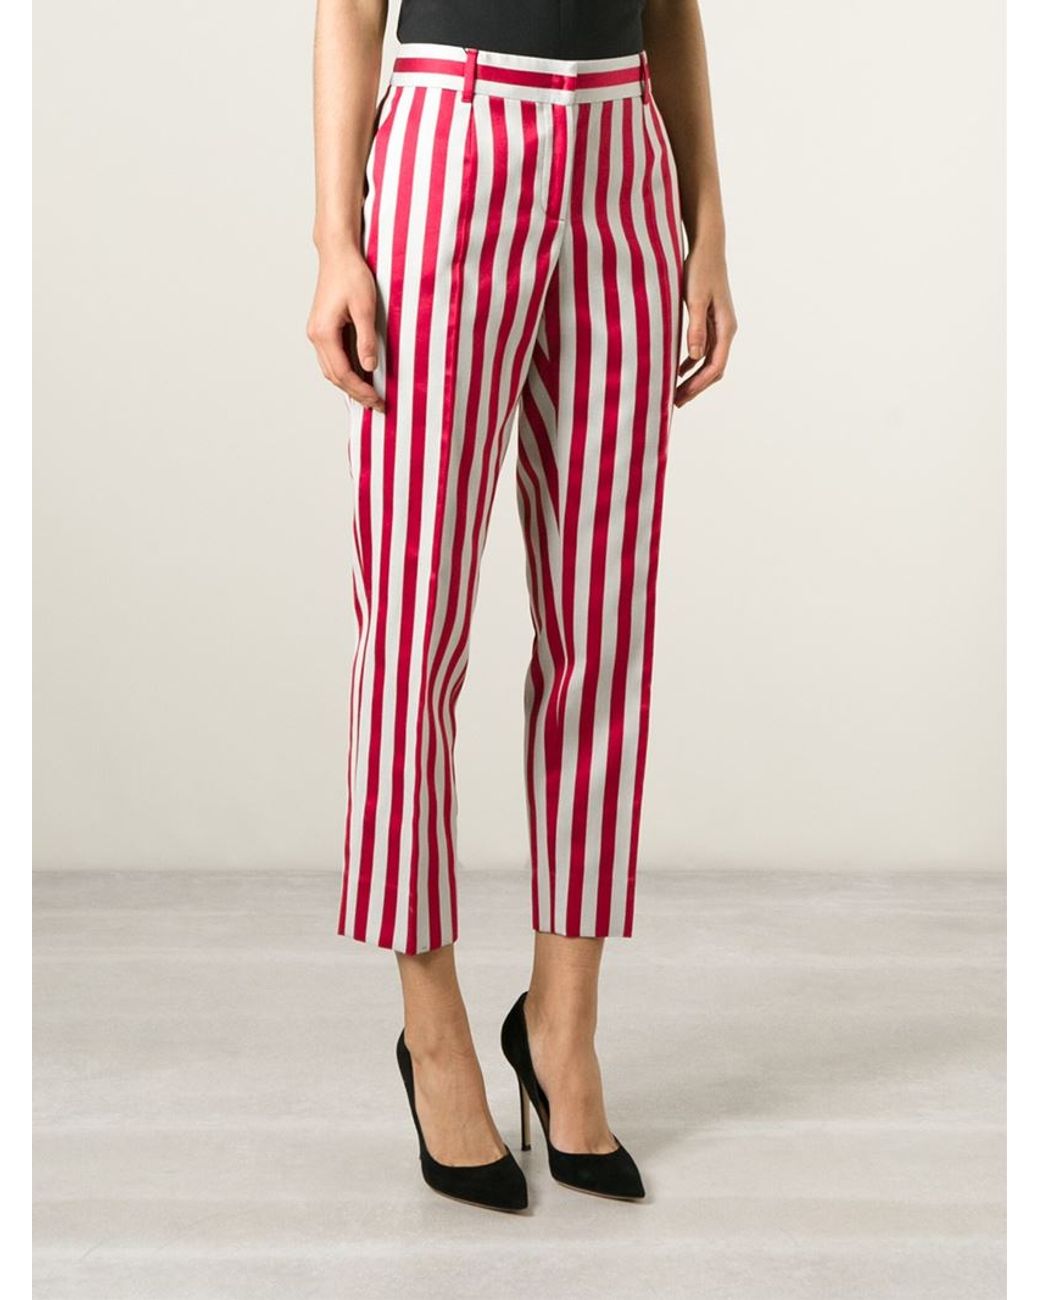 Buy Red & White Trousers & Pants for Women by URBAN FASHION WEAR Online |  Ajio.com